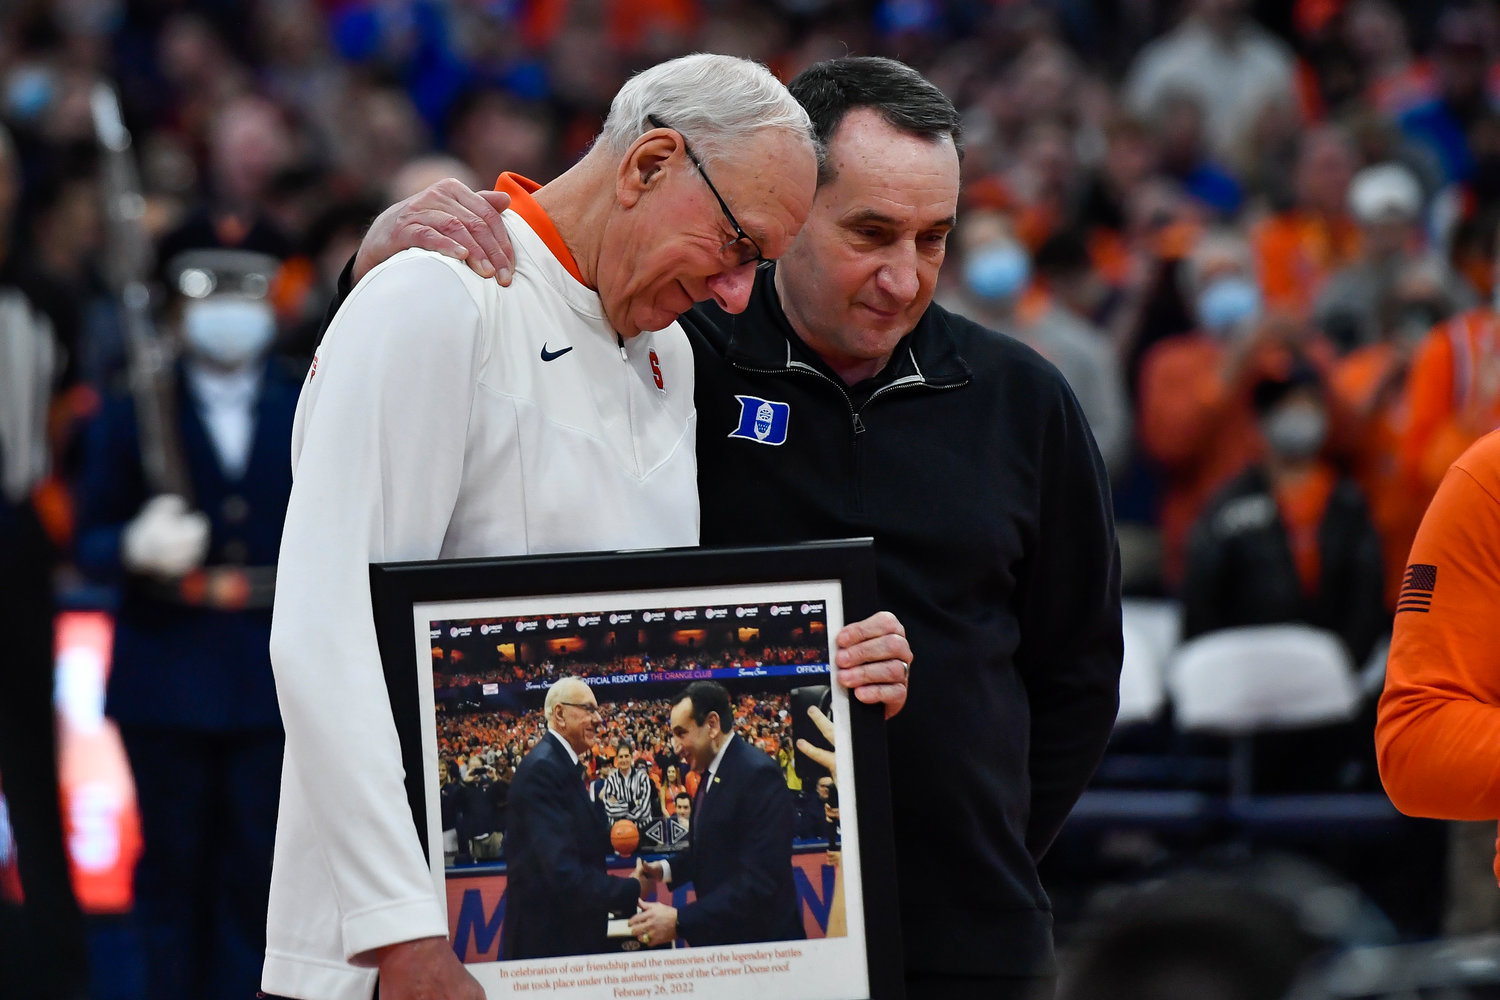 COACH K HONORED — Syracuse coach Jim Boeheim, left, presents Duke coach Mike Krzyzewski with a gift before a college basketball game in Syracuse on Saturday night. Krzyzewski was given a photo of him and Jim Boeheim that was mounted on a tile from the old Carrier Dome roof.